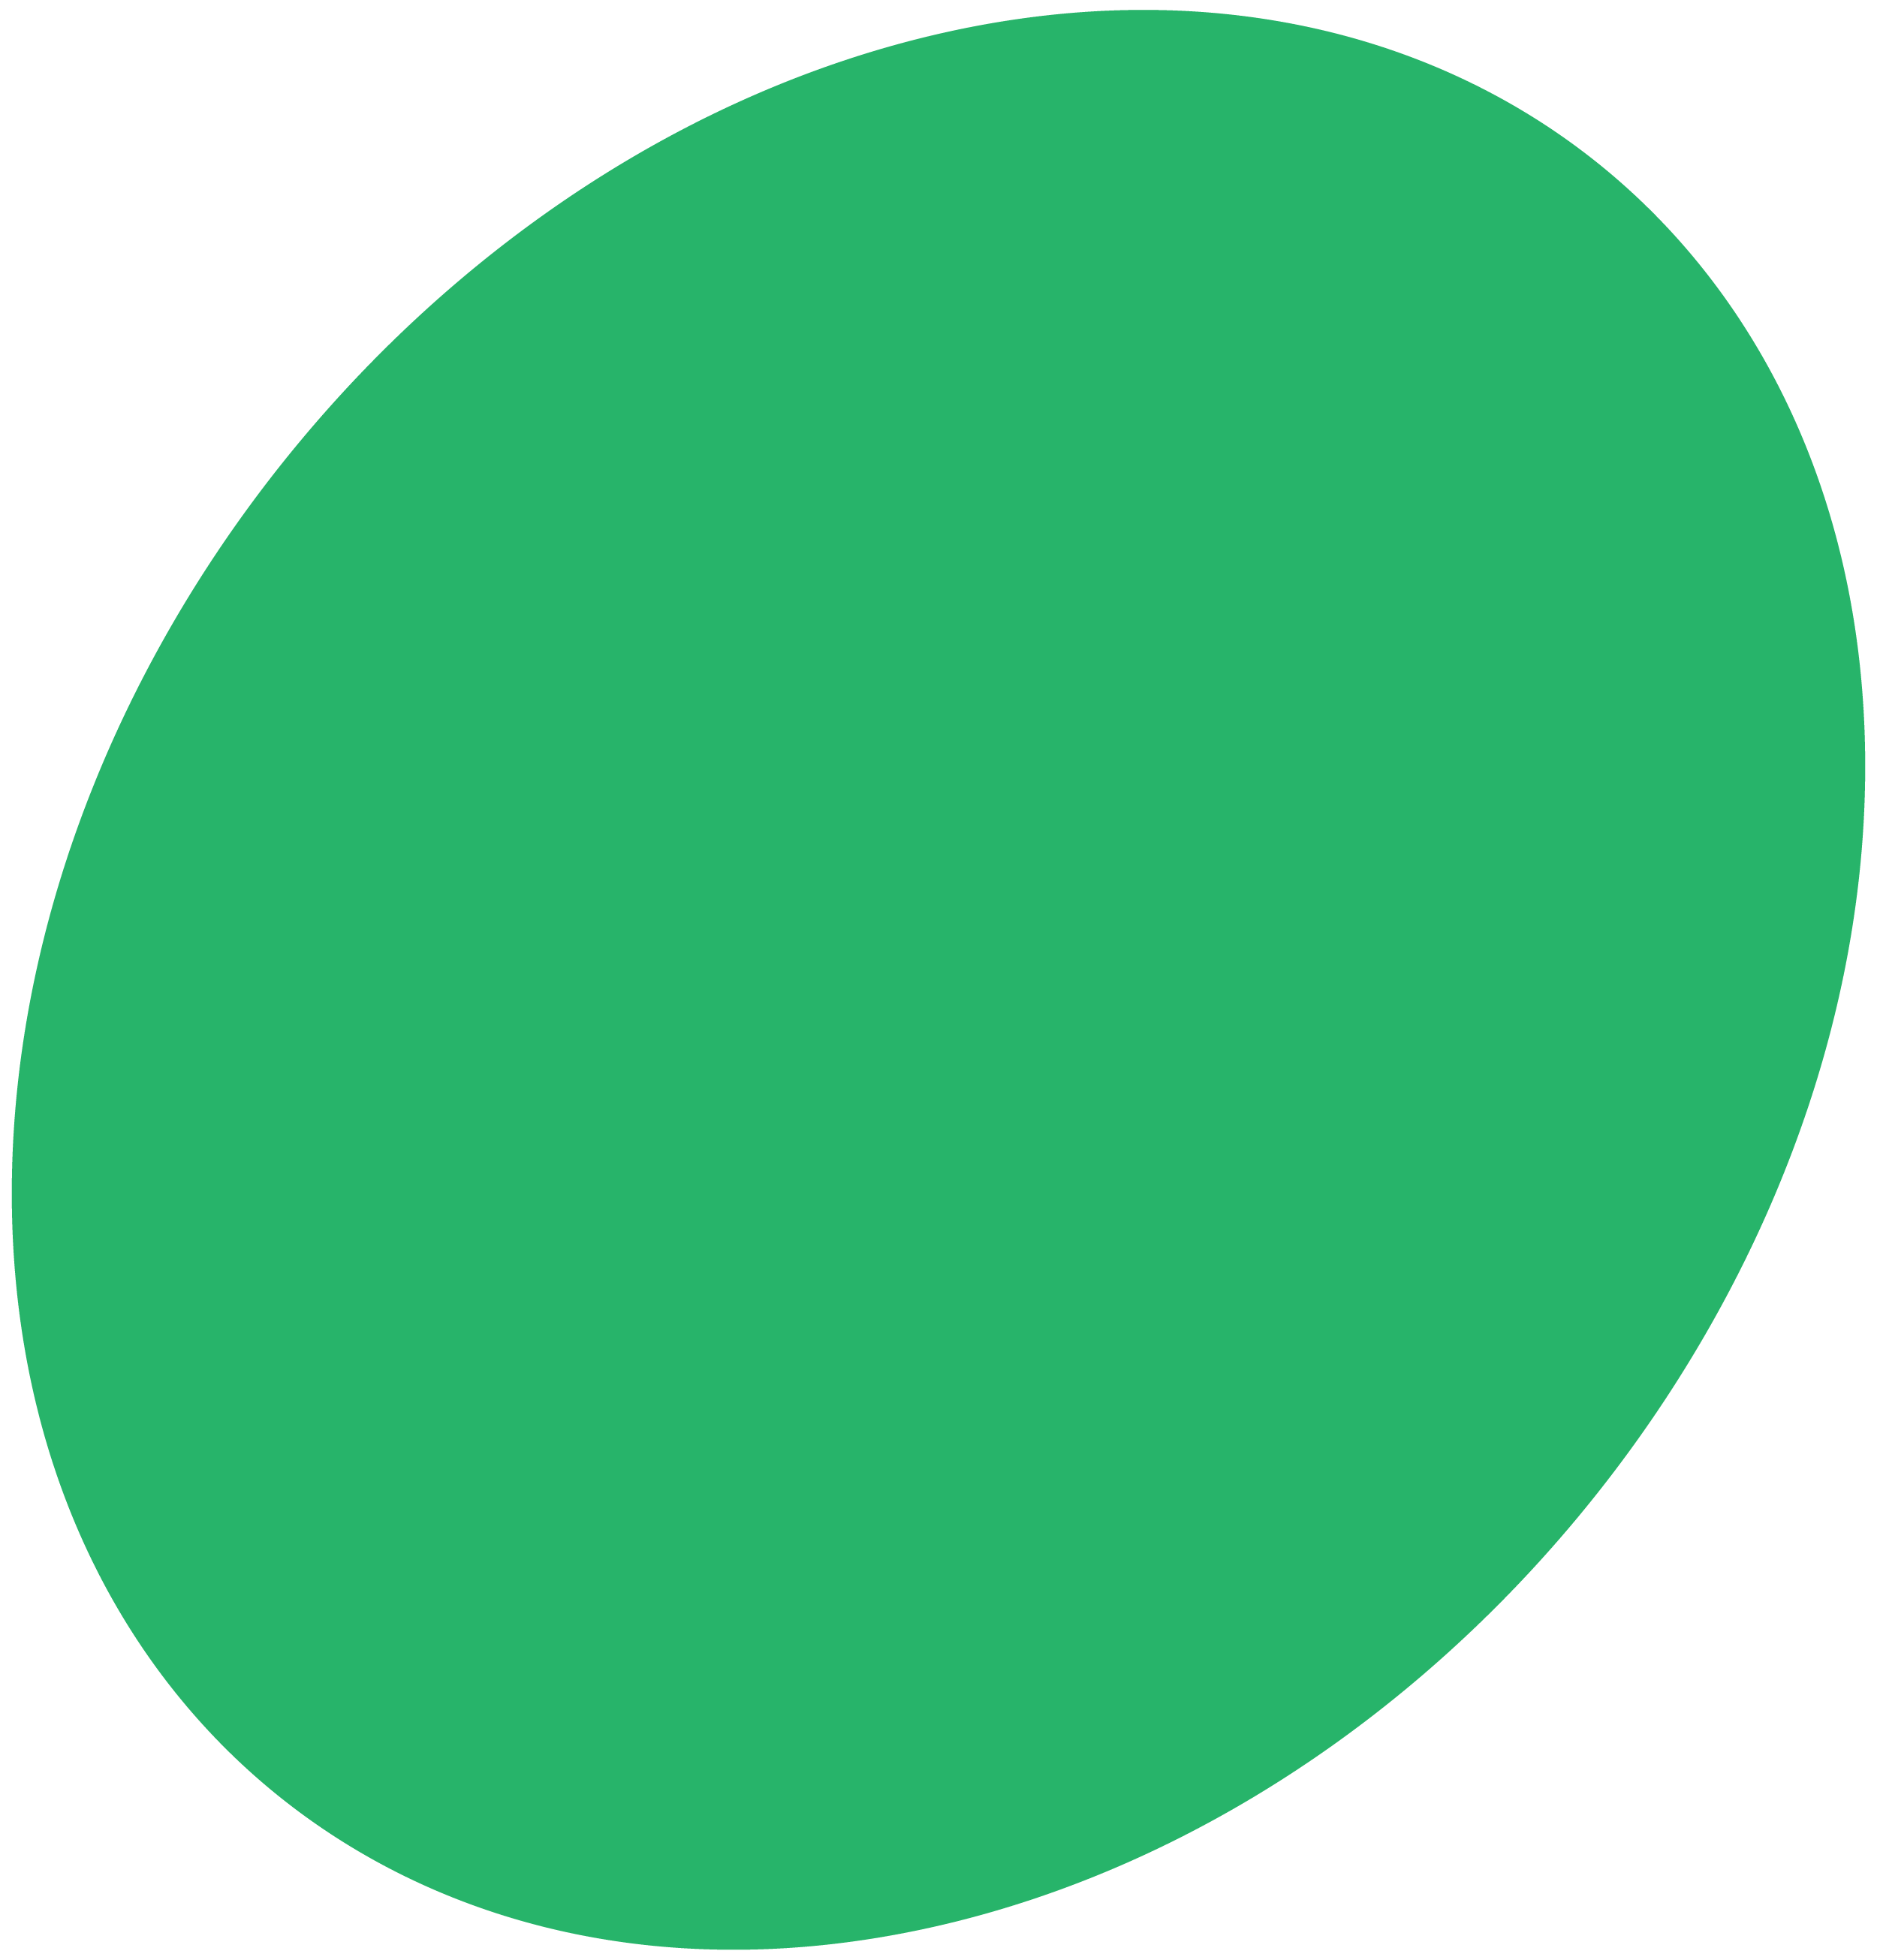 Green oval icon